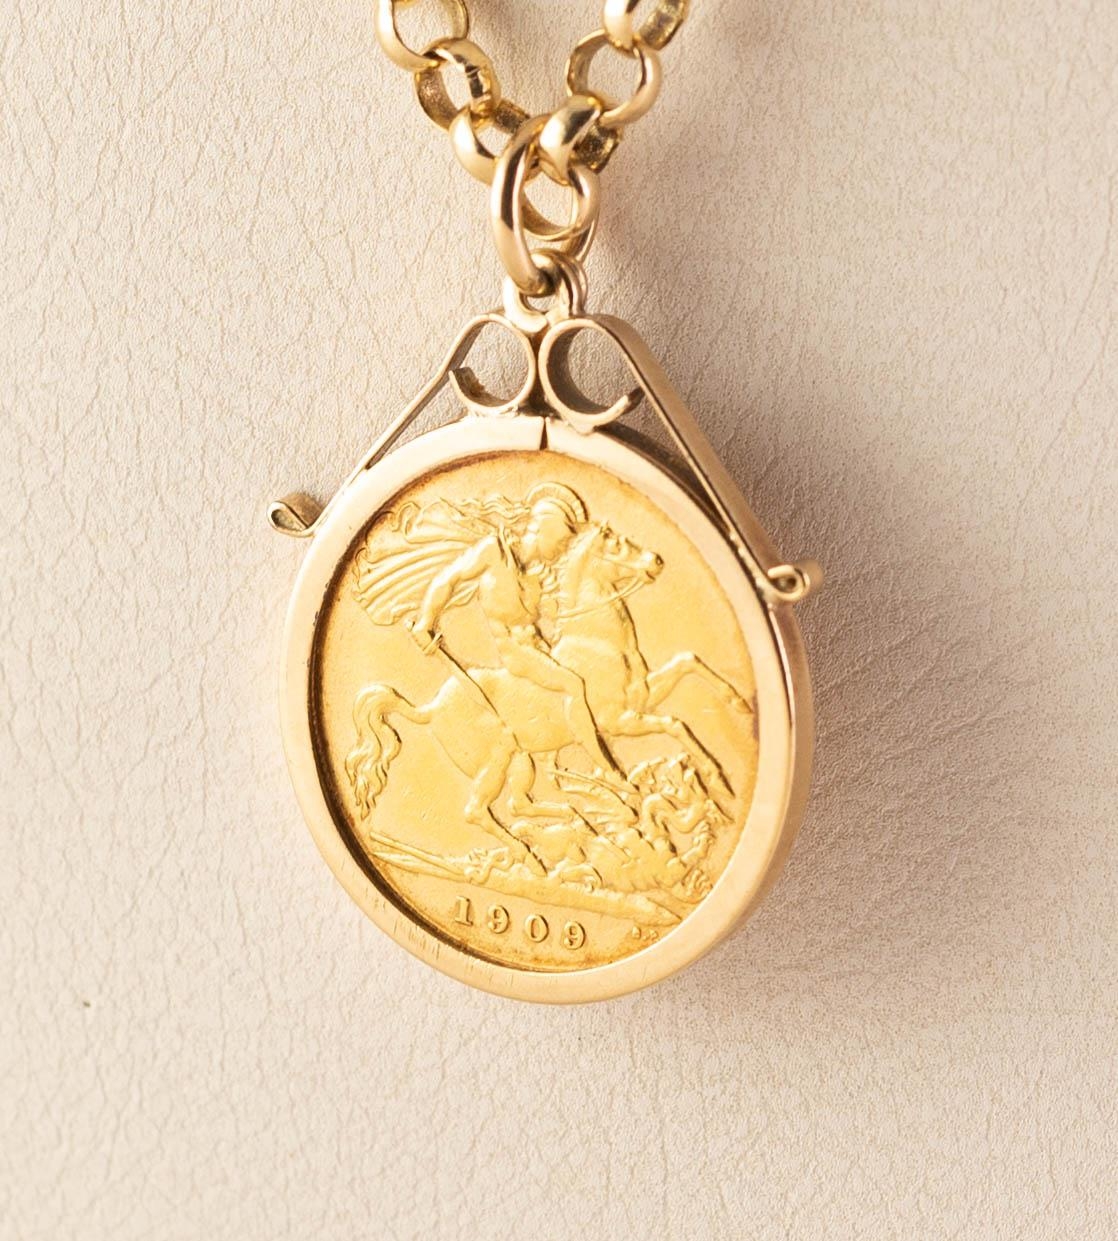 9ct GOLD CHAIN NECKLACE suspending a loose mounted Edward VII (1909) HALF SOVEREIGN, gross weight - Image 2 of 3